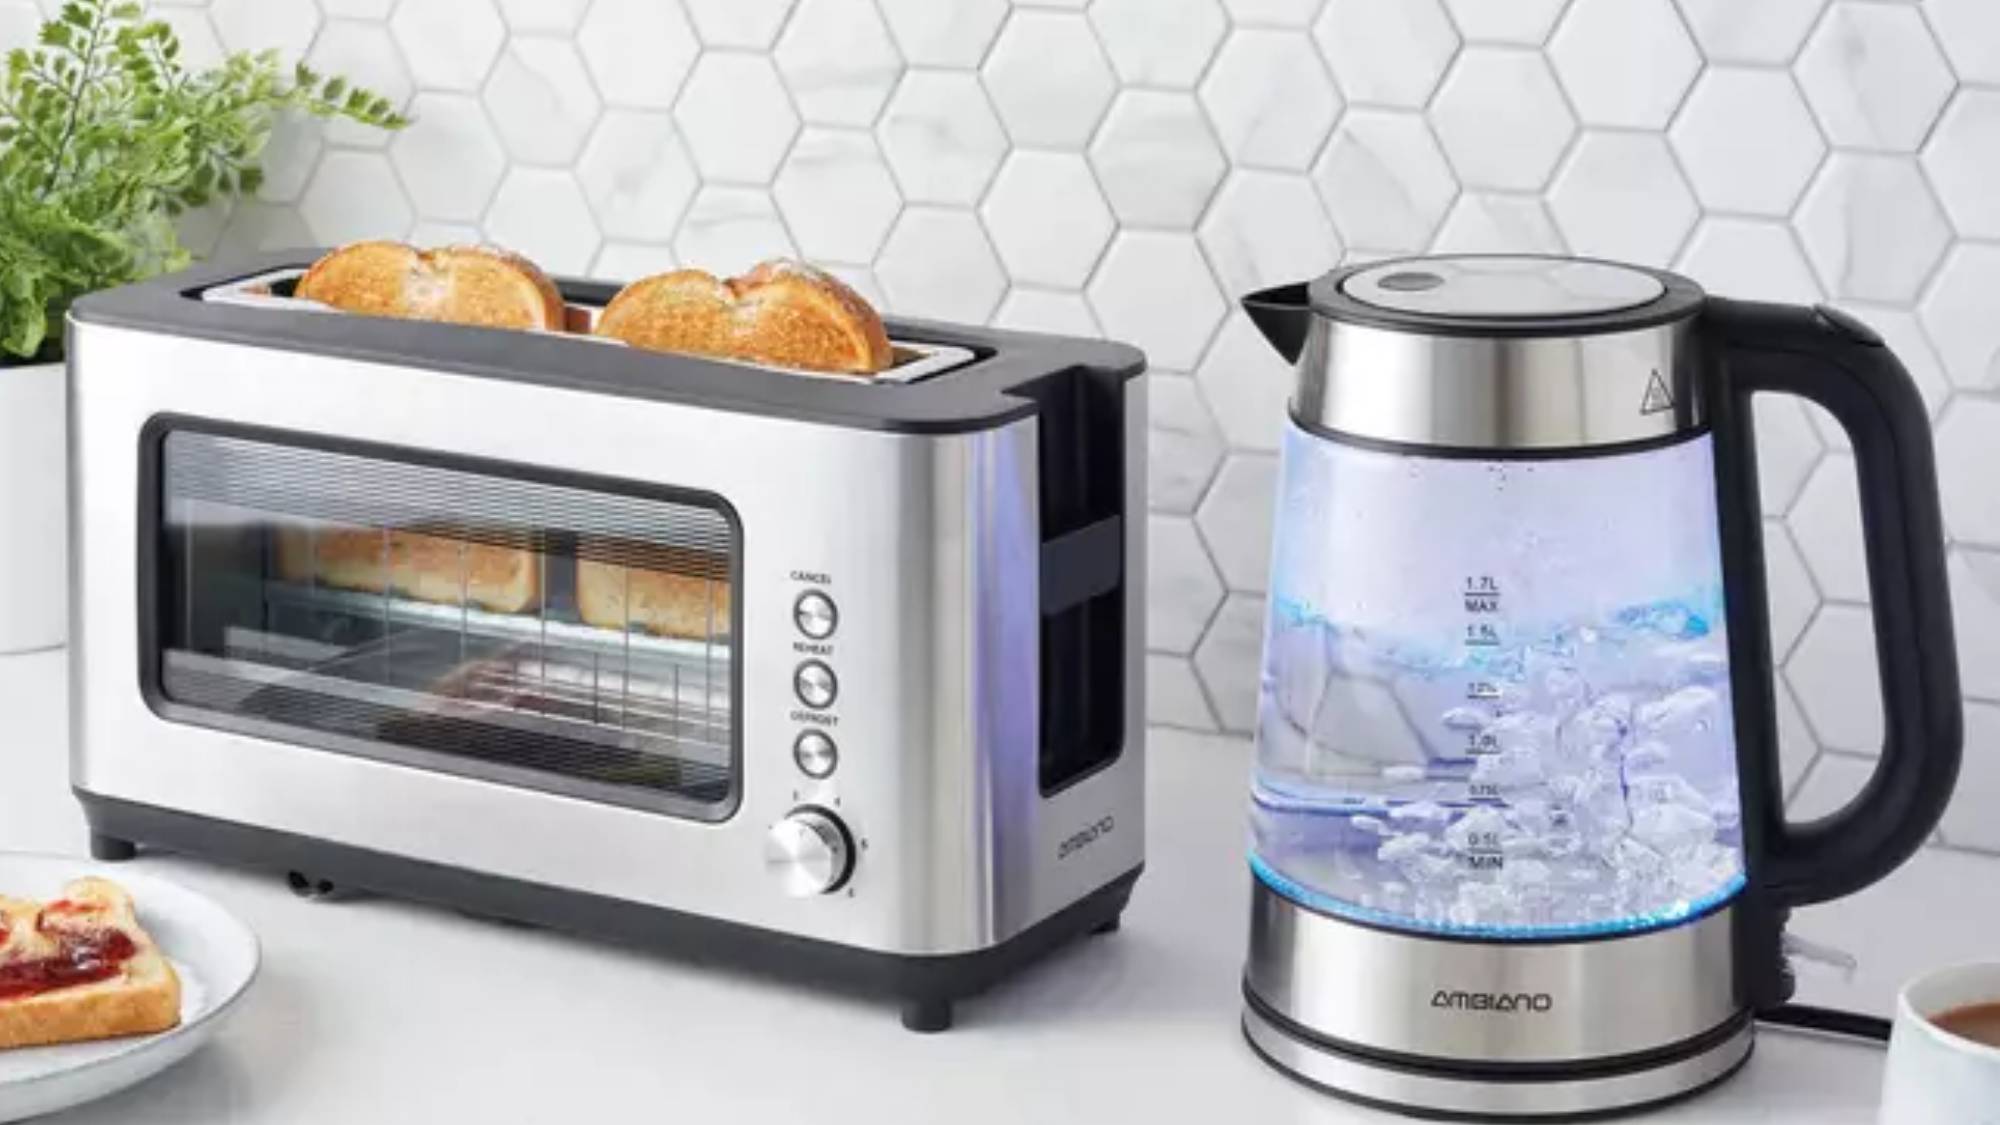 Aldi launches a glass toaster for the perfect slice every single time